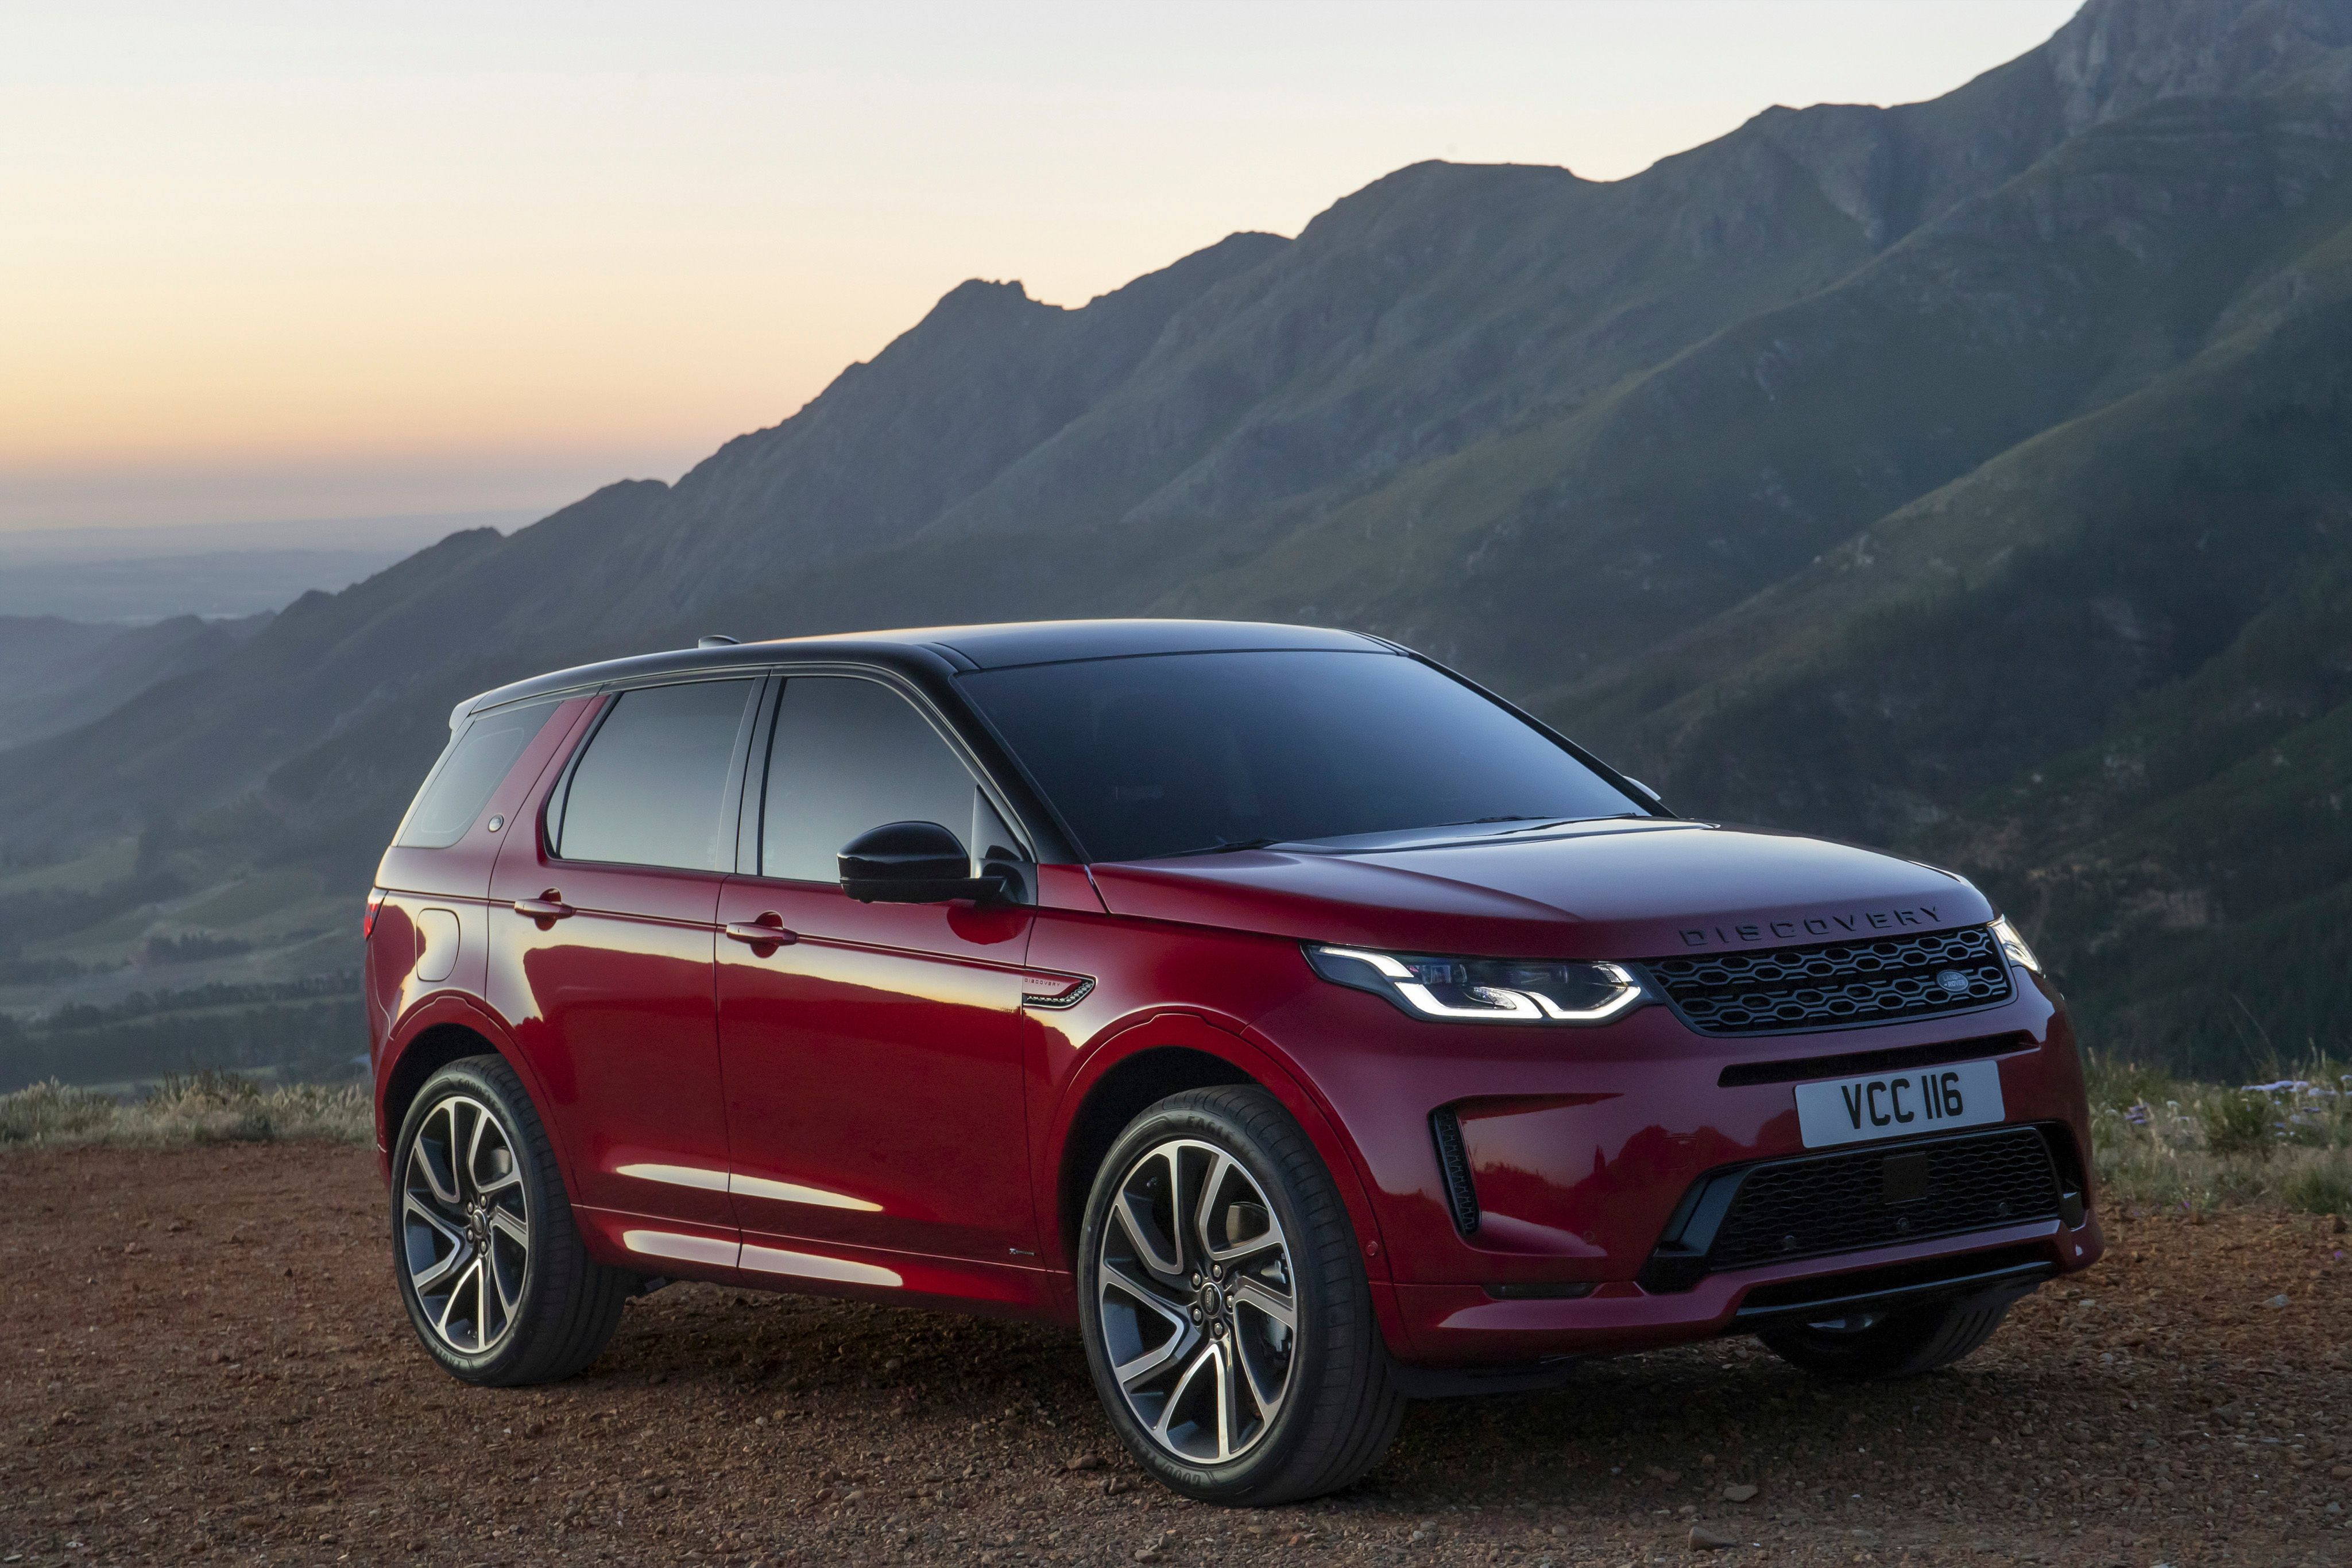 2019 Land Rover finally updates the old Discovery Sport, add new tech and sporty features